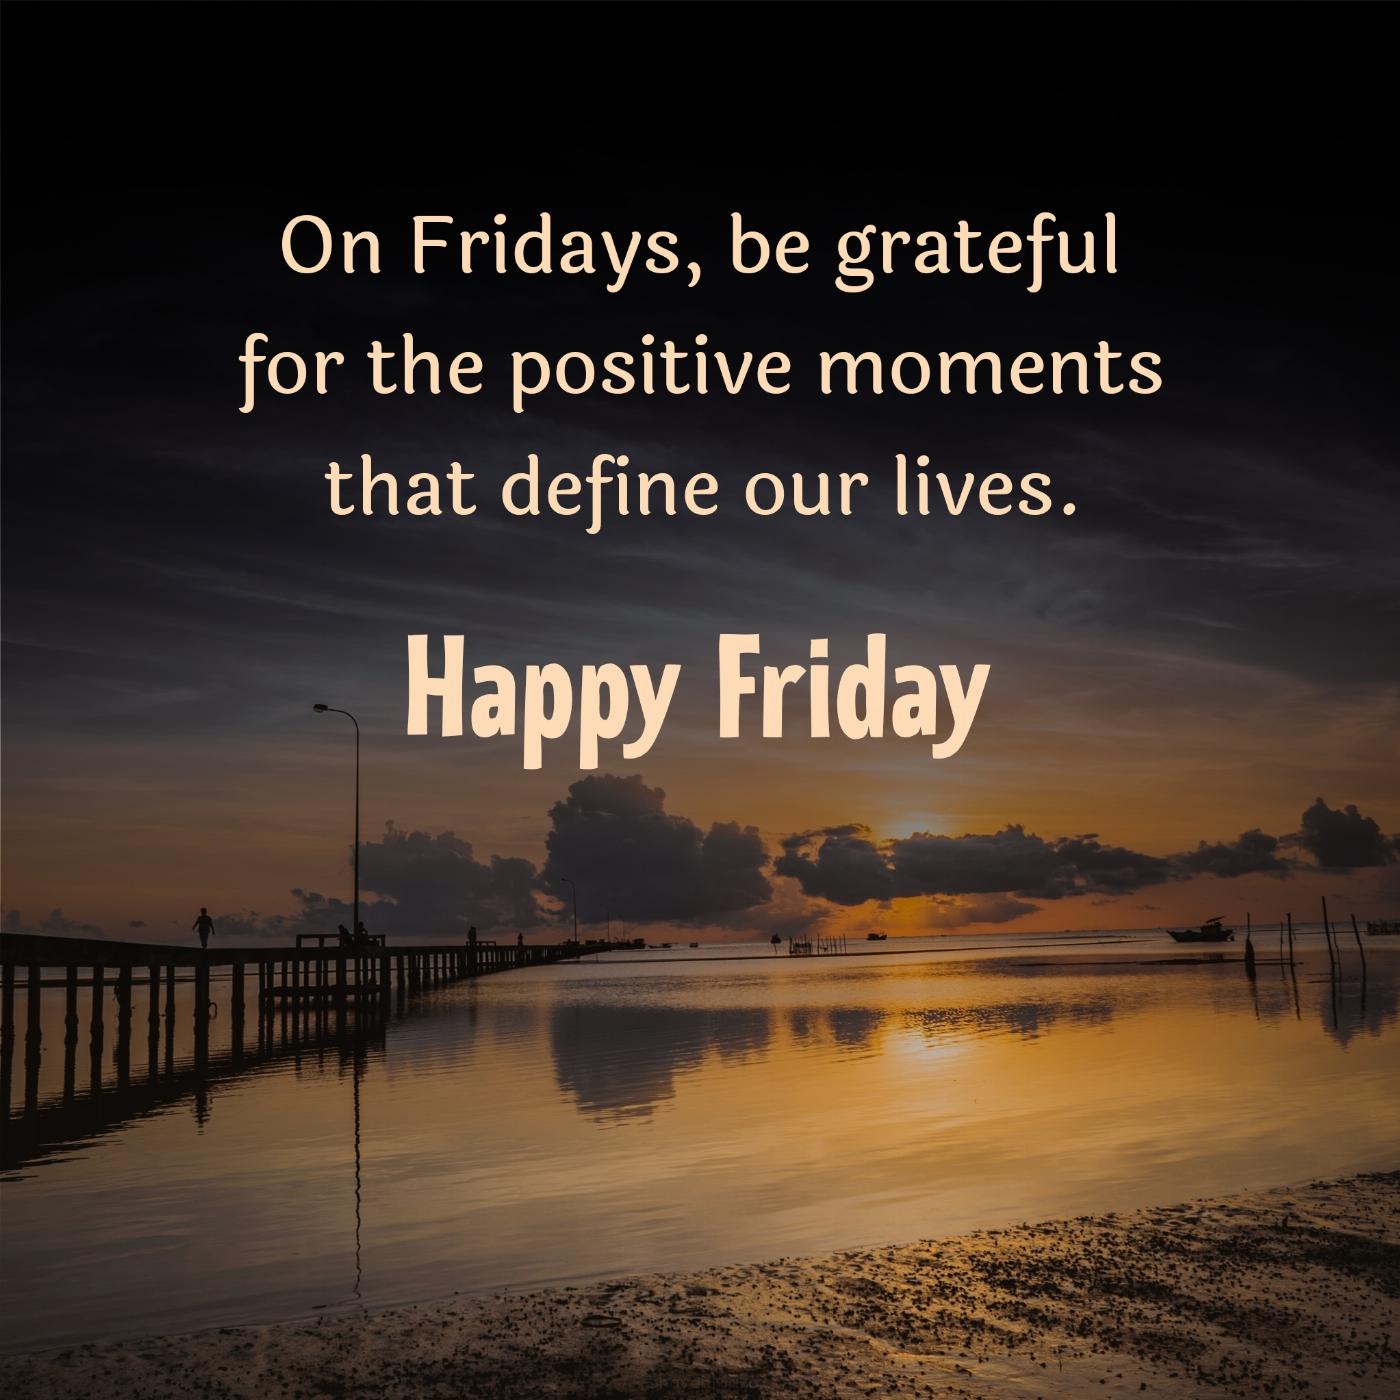 On Fridays be grateful for the positive moments that define our lives